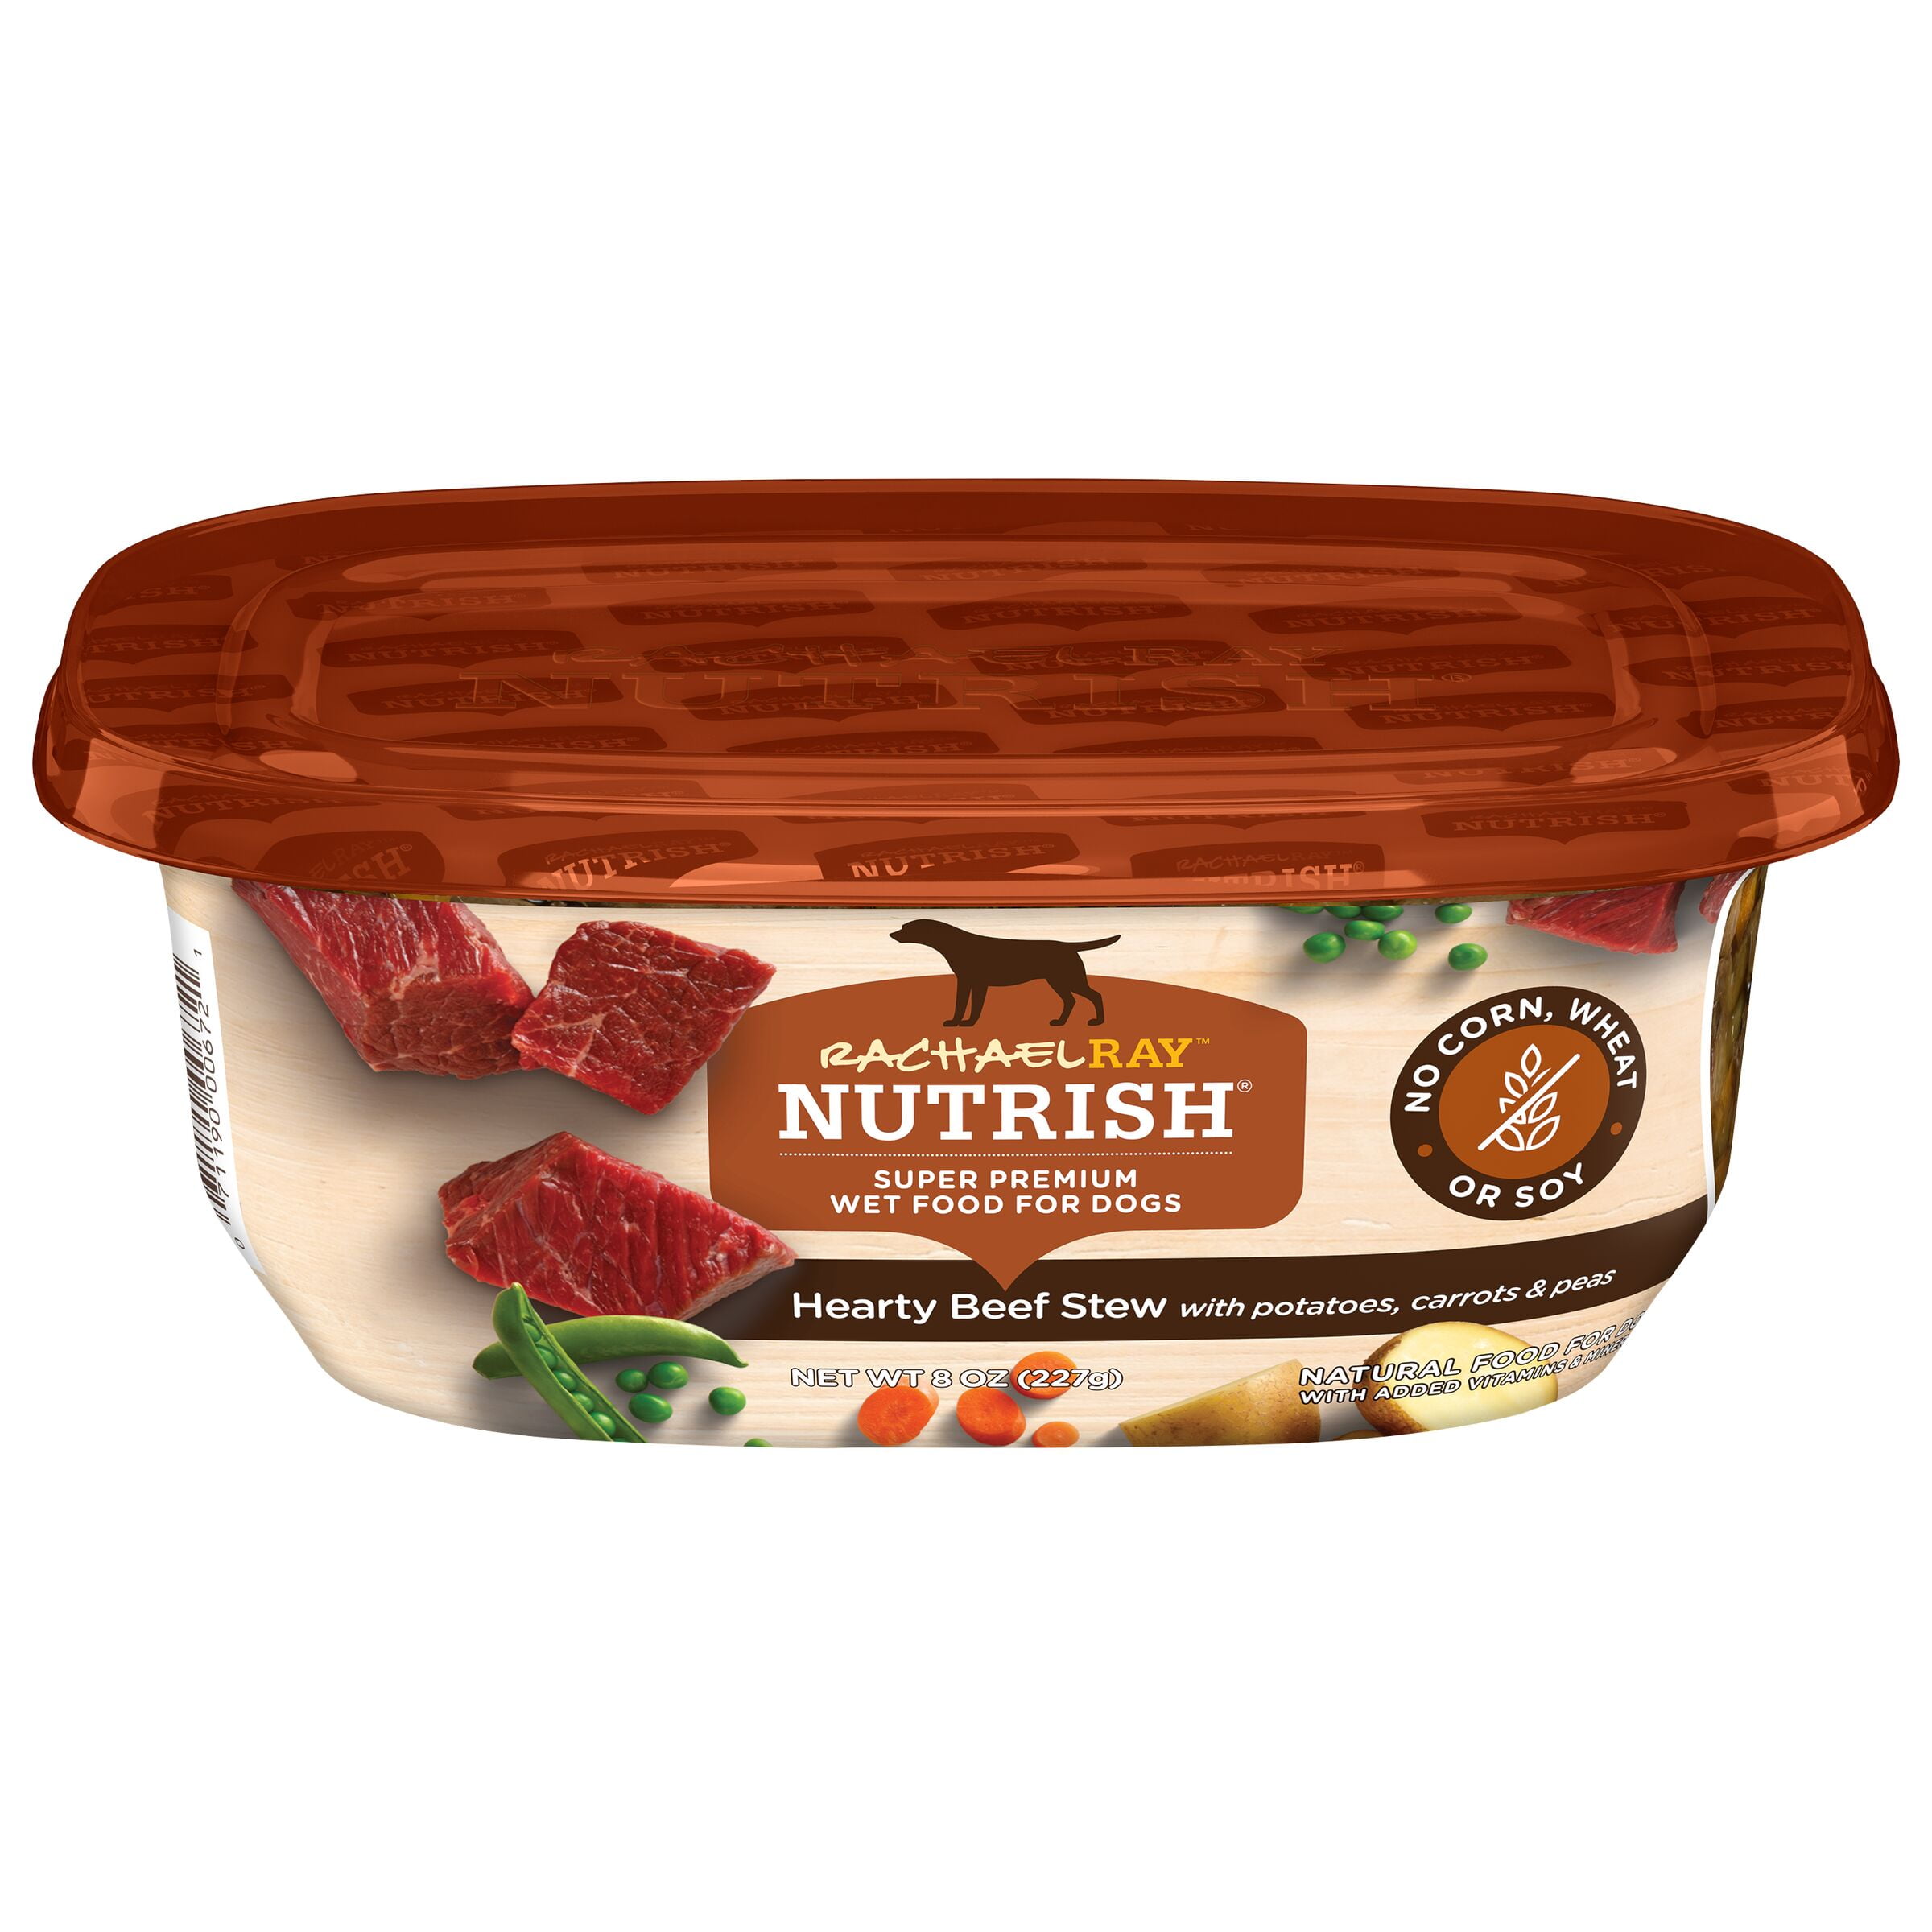 Rachael Ray Nutrish Natural Premium Wet Dog Food, Grain Free, Hearty Beef Stew, 8-Ounce Tub